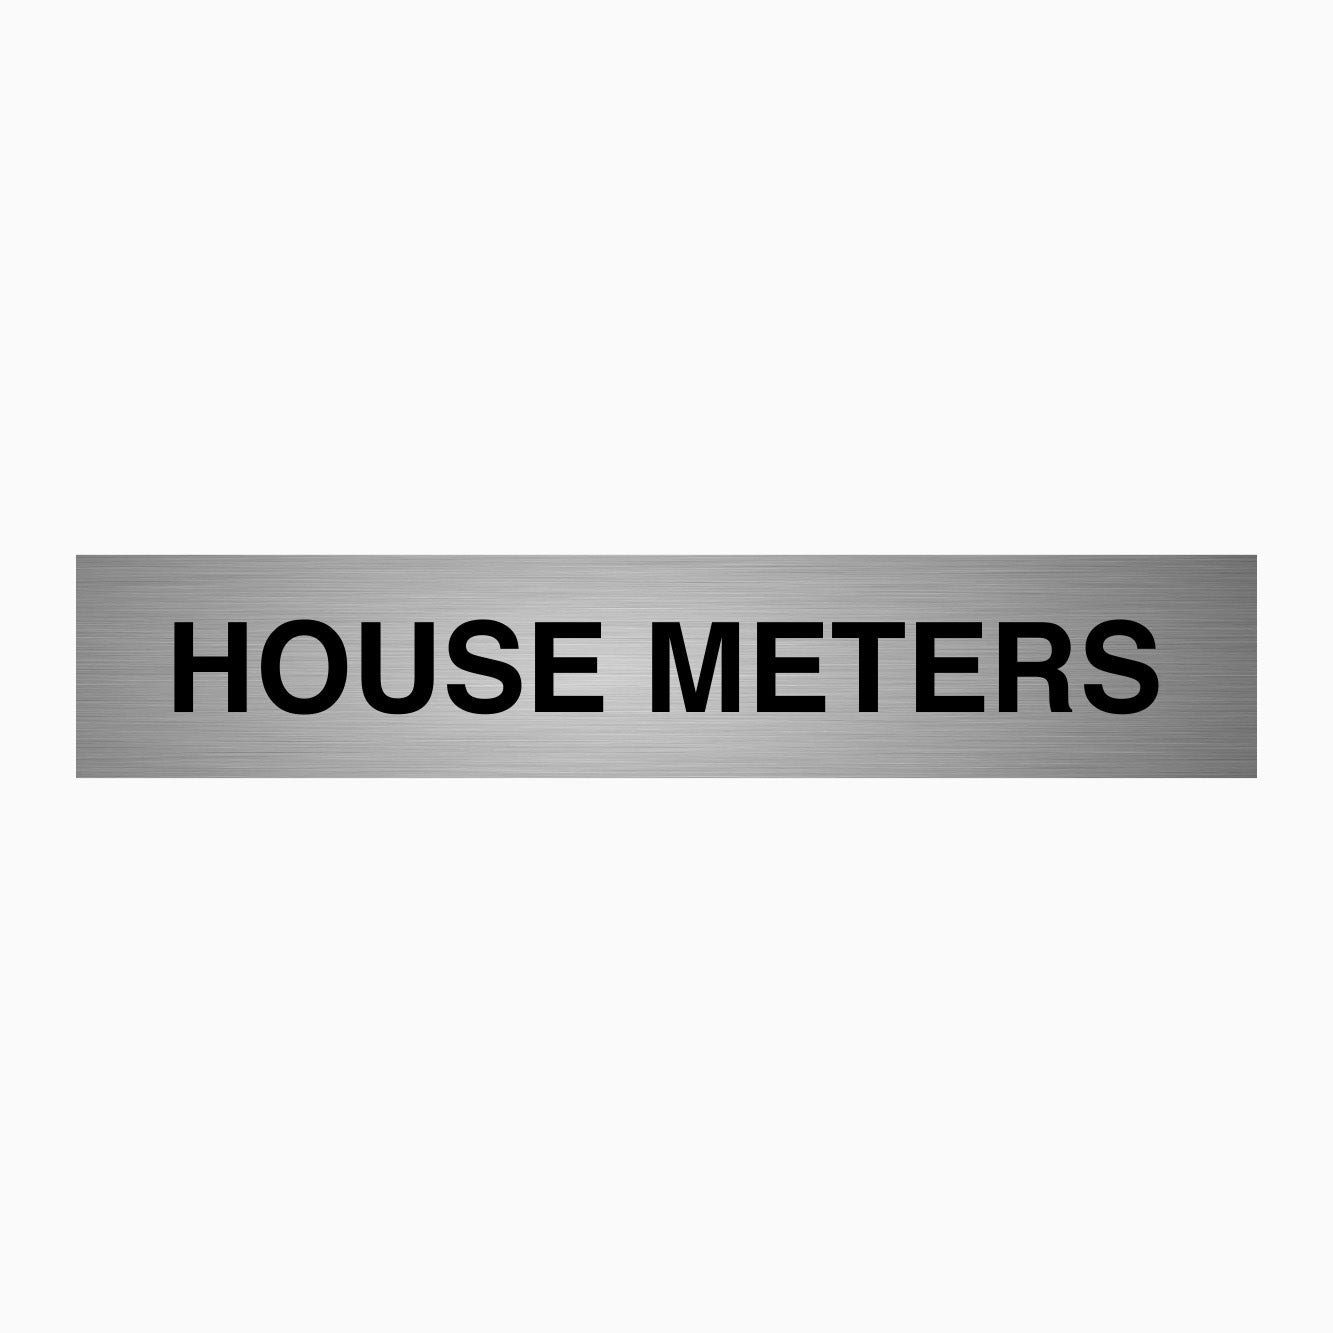 HOUSE METERS SIGN - STATUTORY SIGN